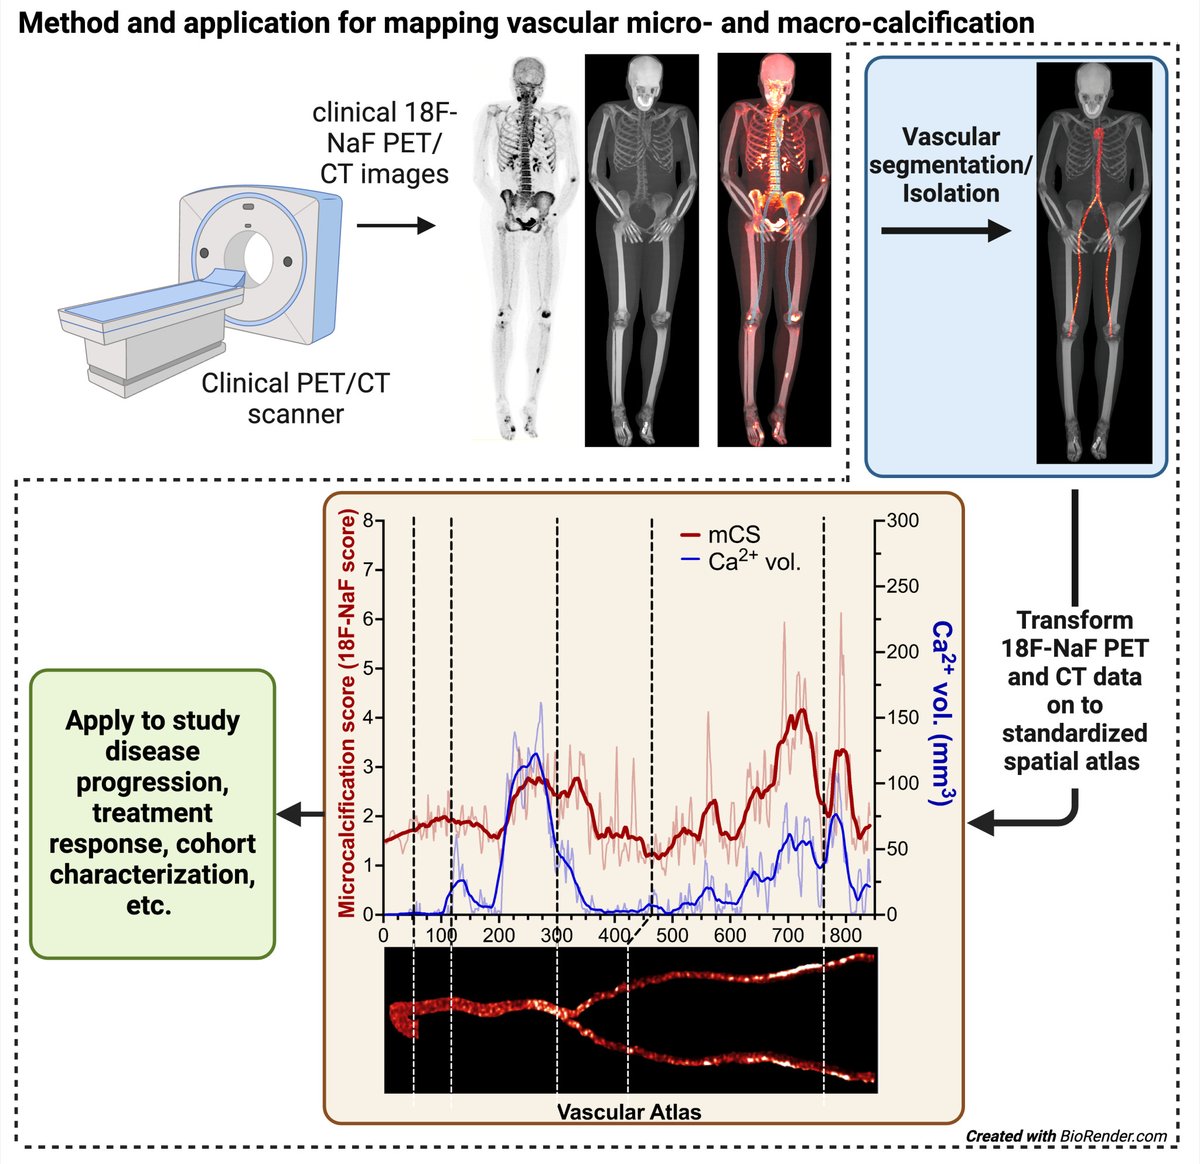 Vascular micro- and macro- calcification from 18F-NaF PET/CT can be mapped onto a spatial atlas, serving as a novel technique to sensitively detect and track vascular calcification across space a... @A_sheppard9 @babaksaboury @Faraz_Farhadi @elizabeththeng ahajrnls.org/3UYvQ2P